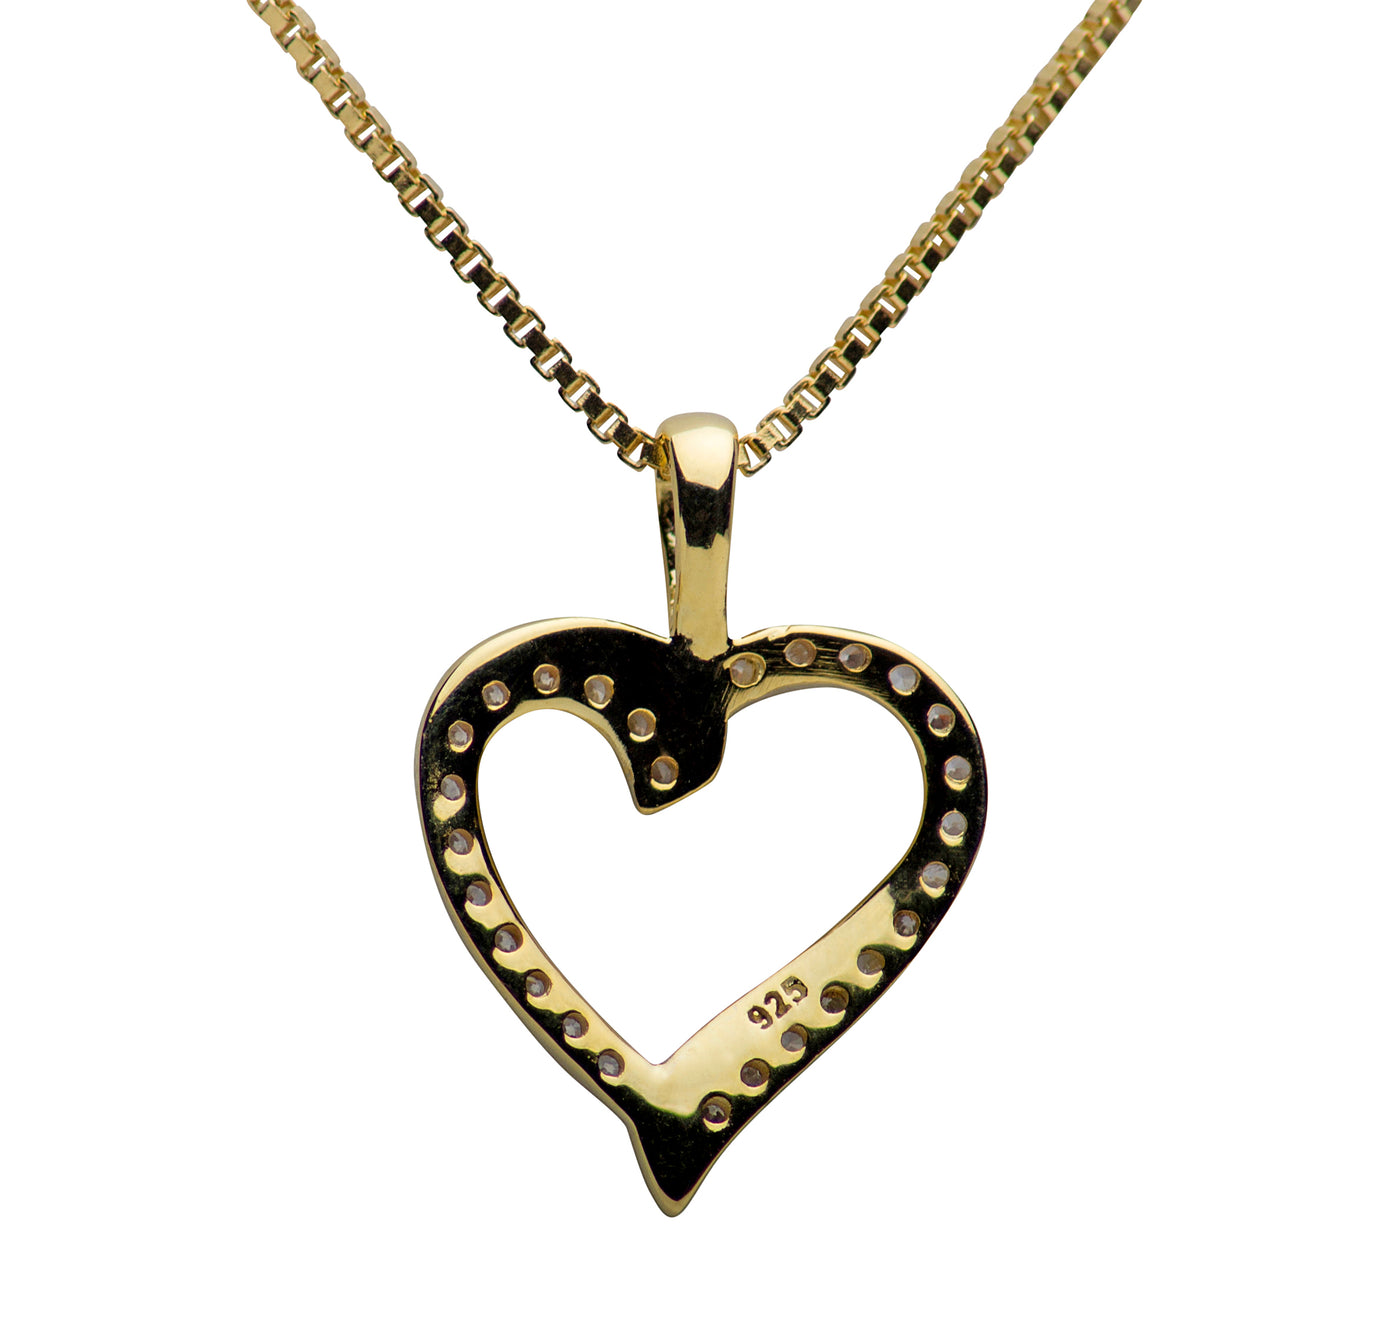 14K Gold Plated Sterling Silver & Cubic Zirconia Heart Necklace